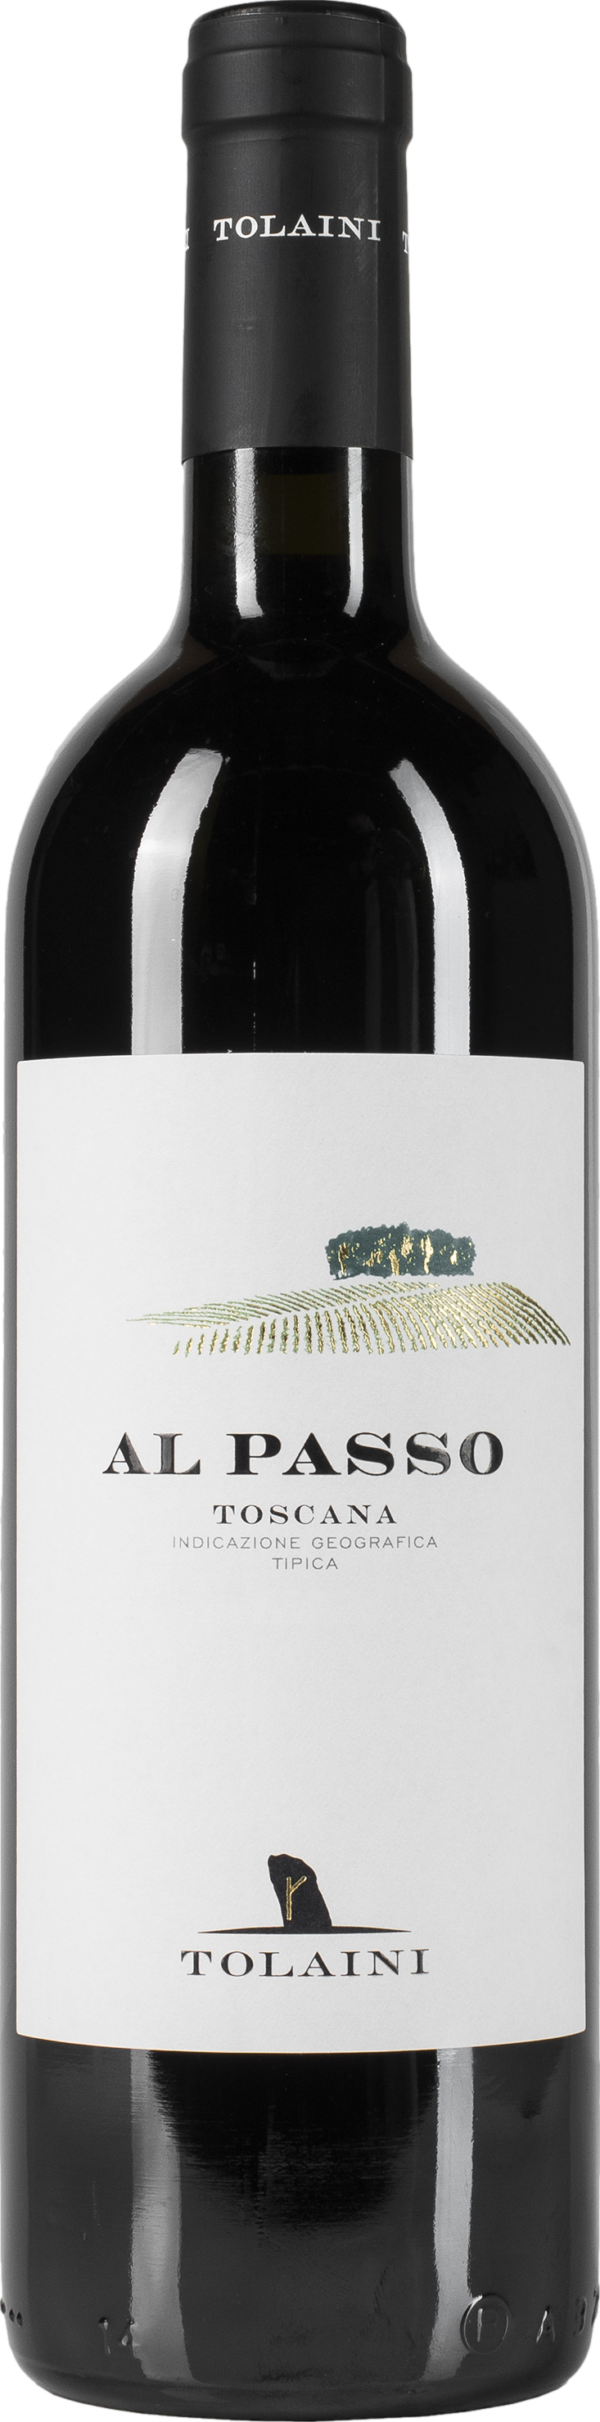 Product image of Tolaini Al Passo 2020 from 8wines